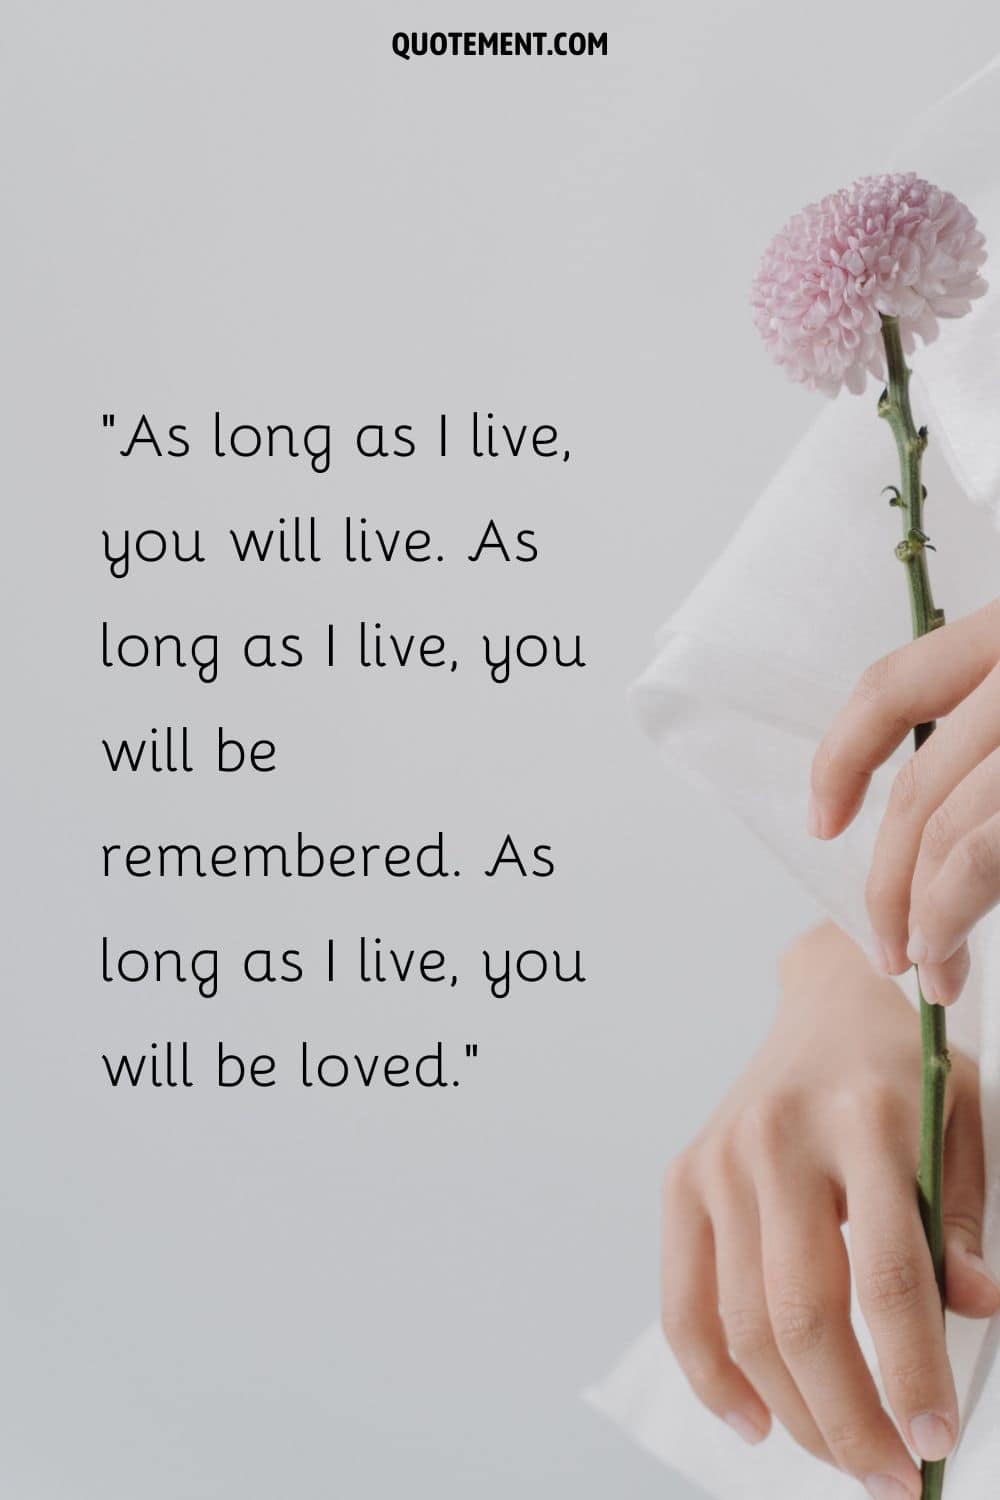 As long as I live, you will live. As long as I live, you will be remembered. As long as I live, you will be loved